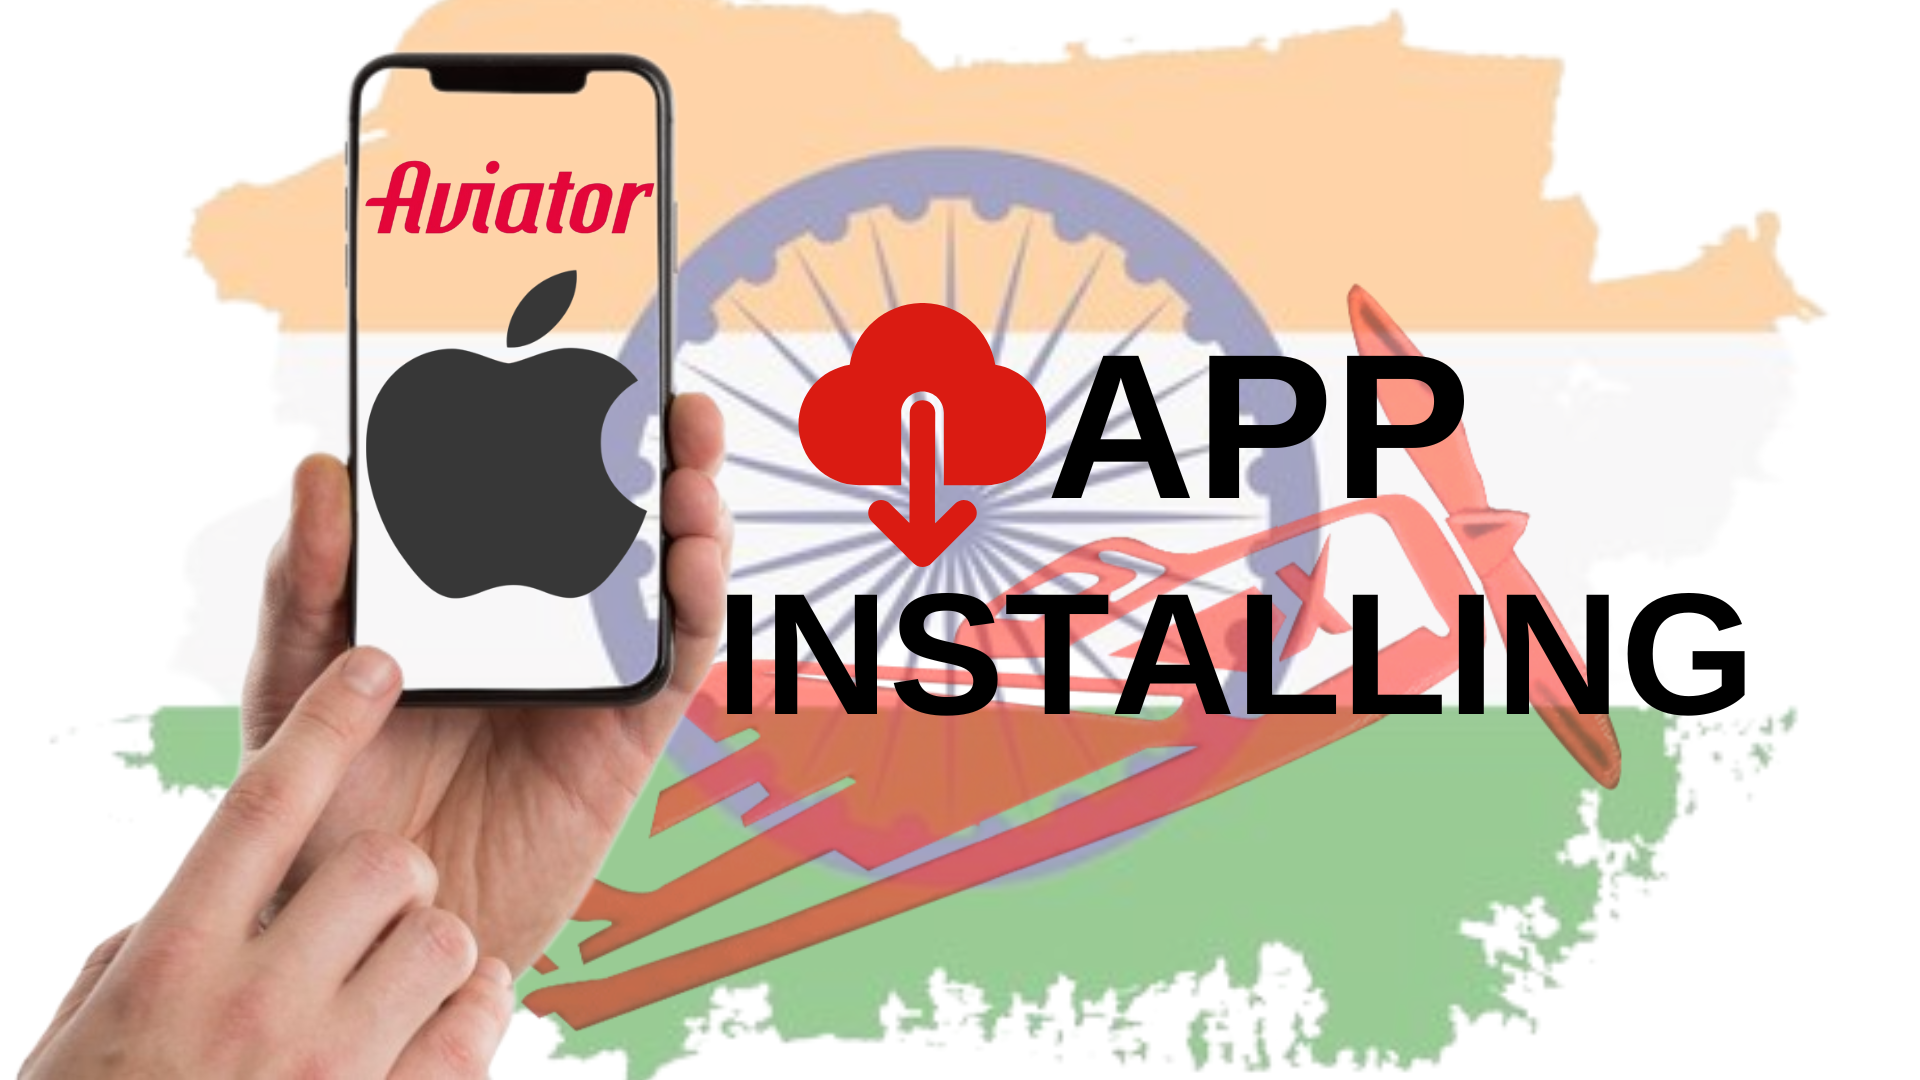 A hand holding an IOS phone with text 'App installing', and Indian flag background